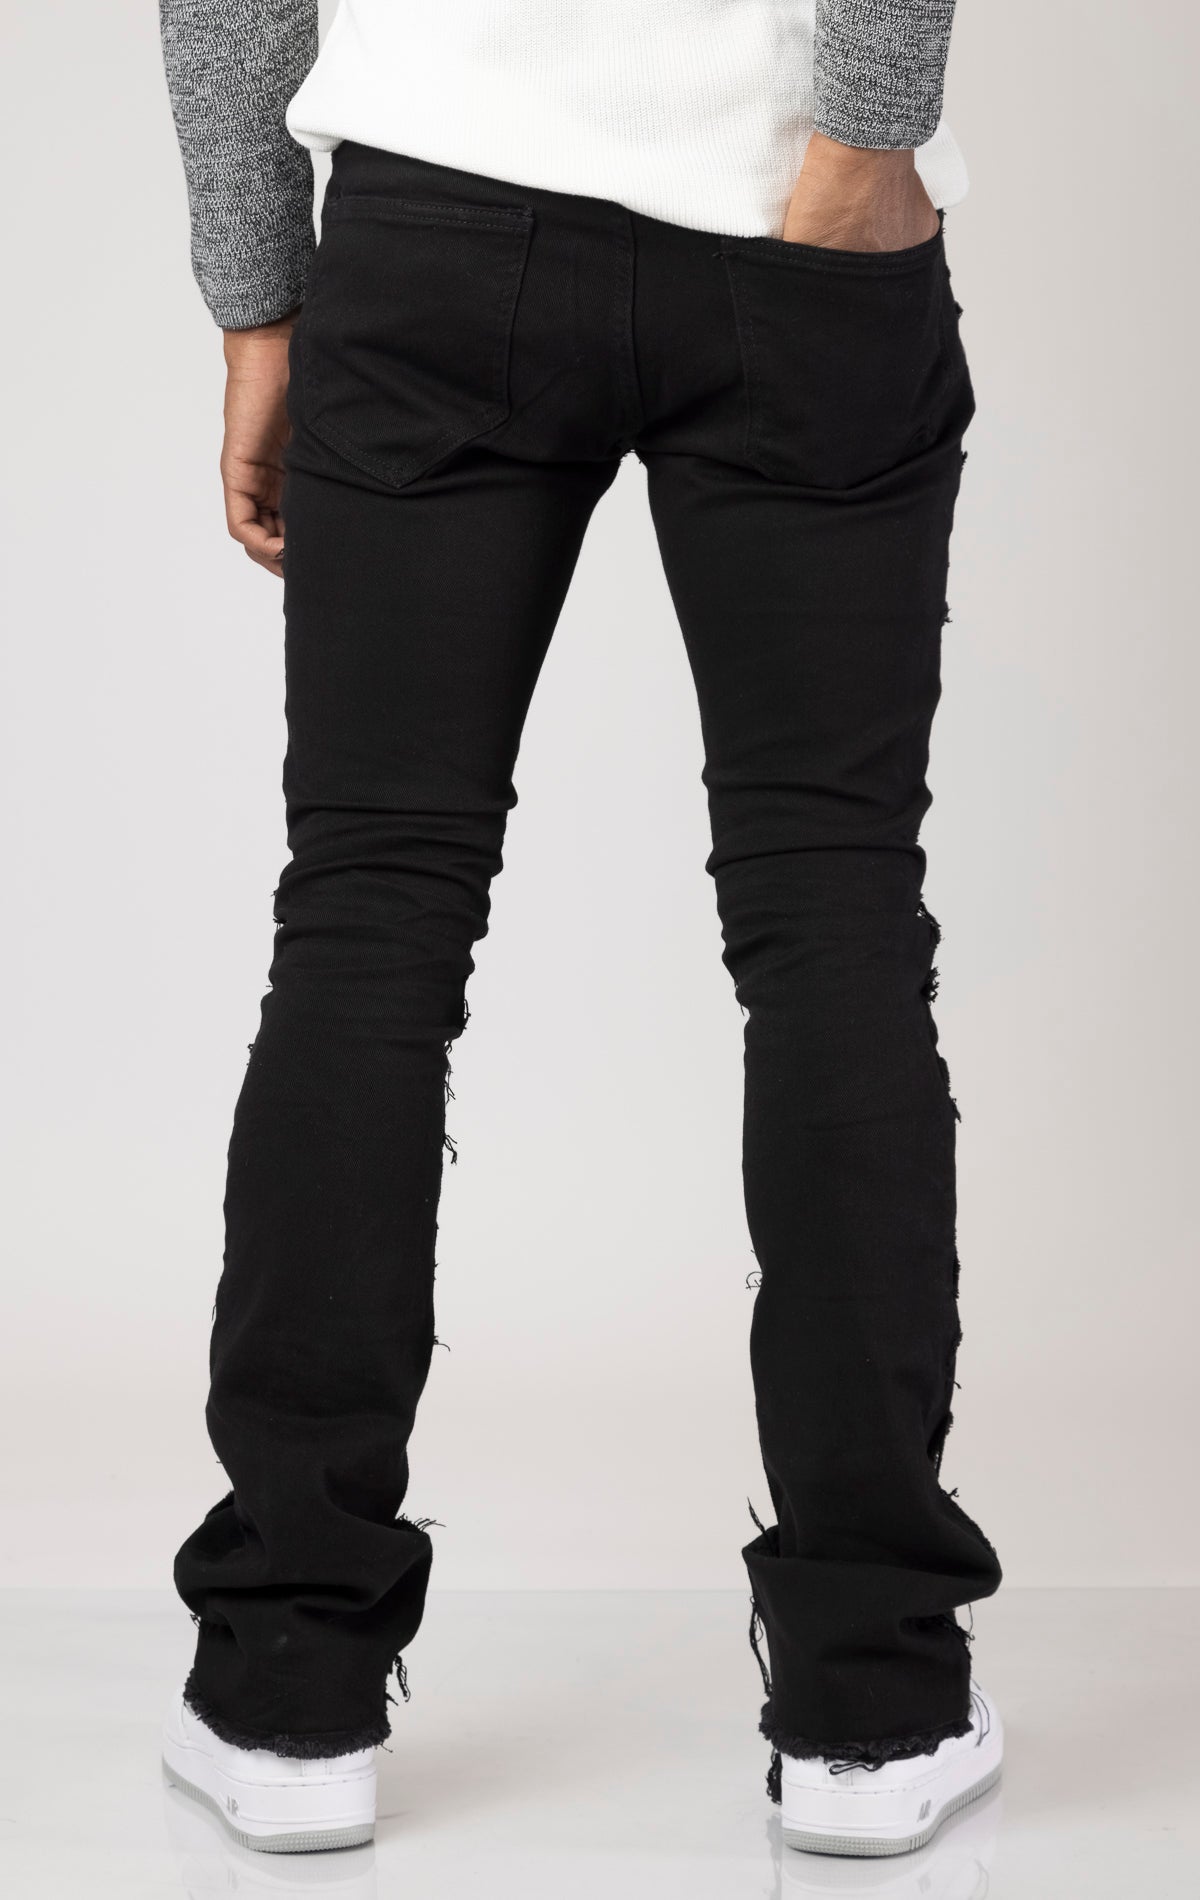 Men's mid-rise, stretchy jeans in a dark wash with a stacked leg design. The jeans feature a purple lace screen print throughout the legs, five pockets, belt loops, and a zipper fly with a top button closure.